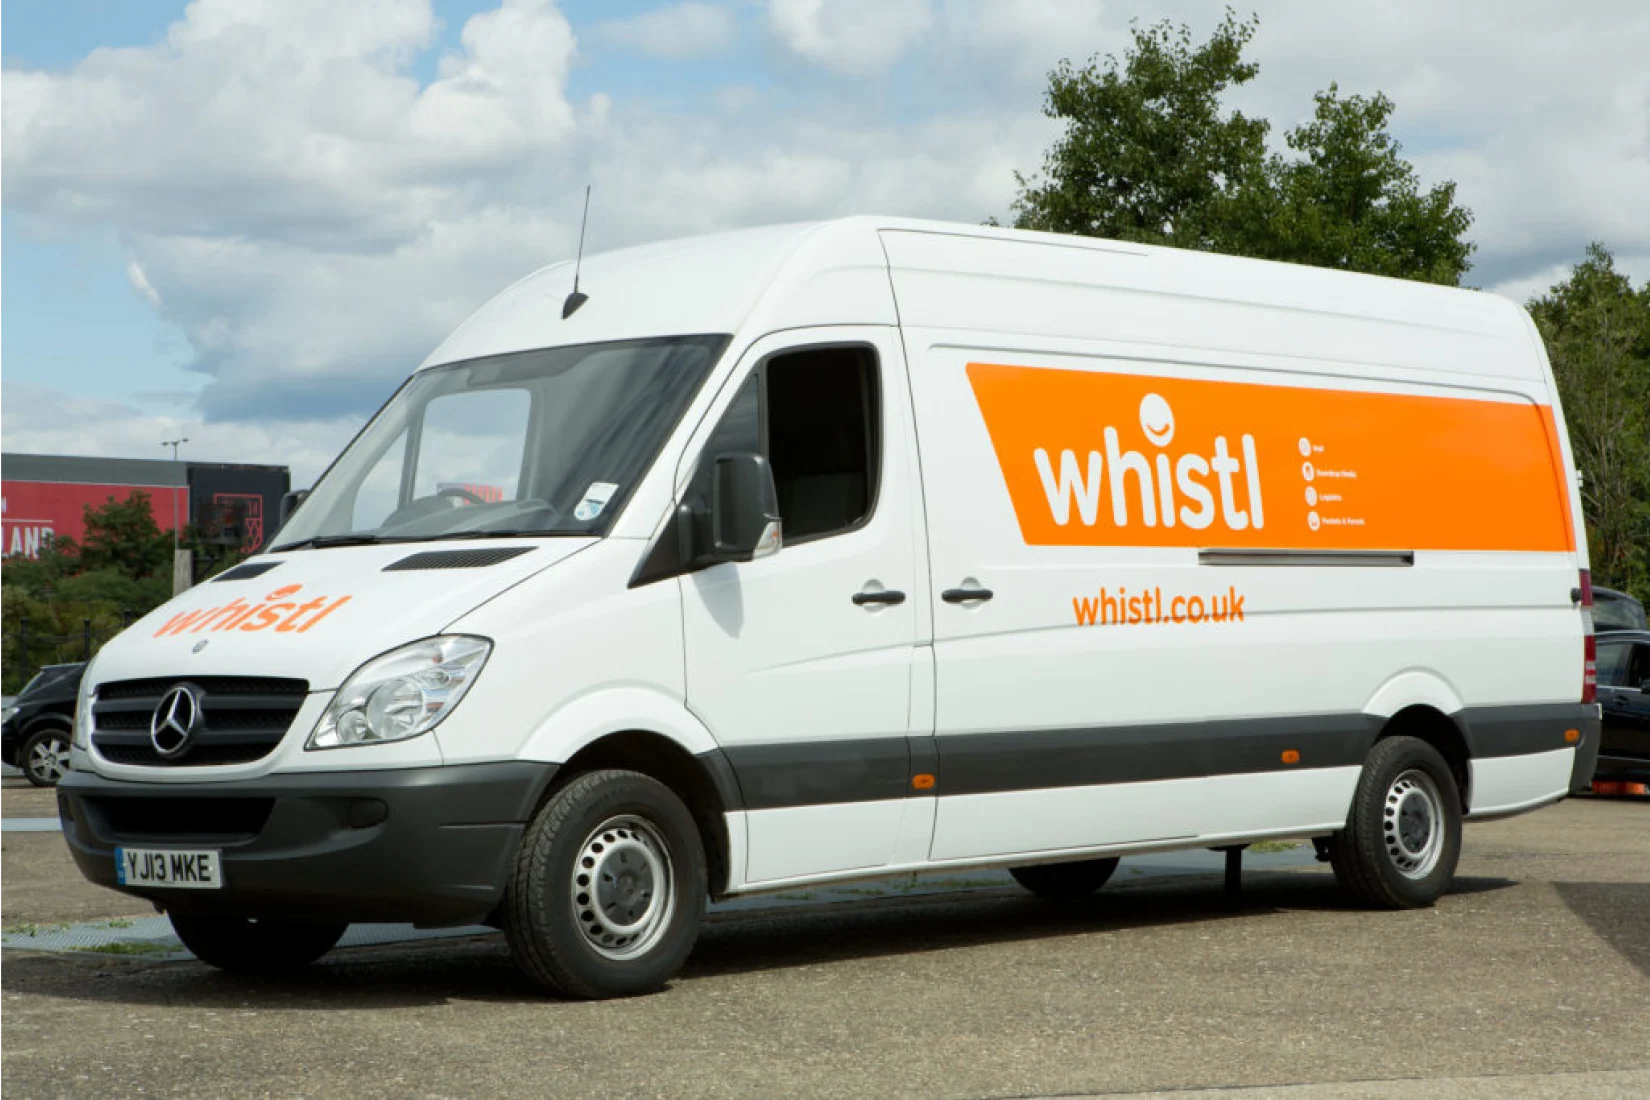 Whistl courier van outside